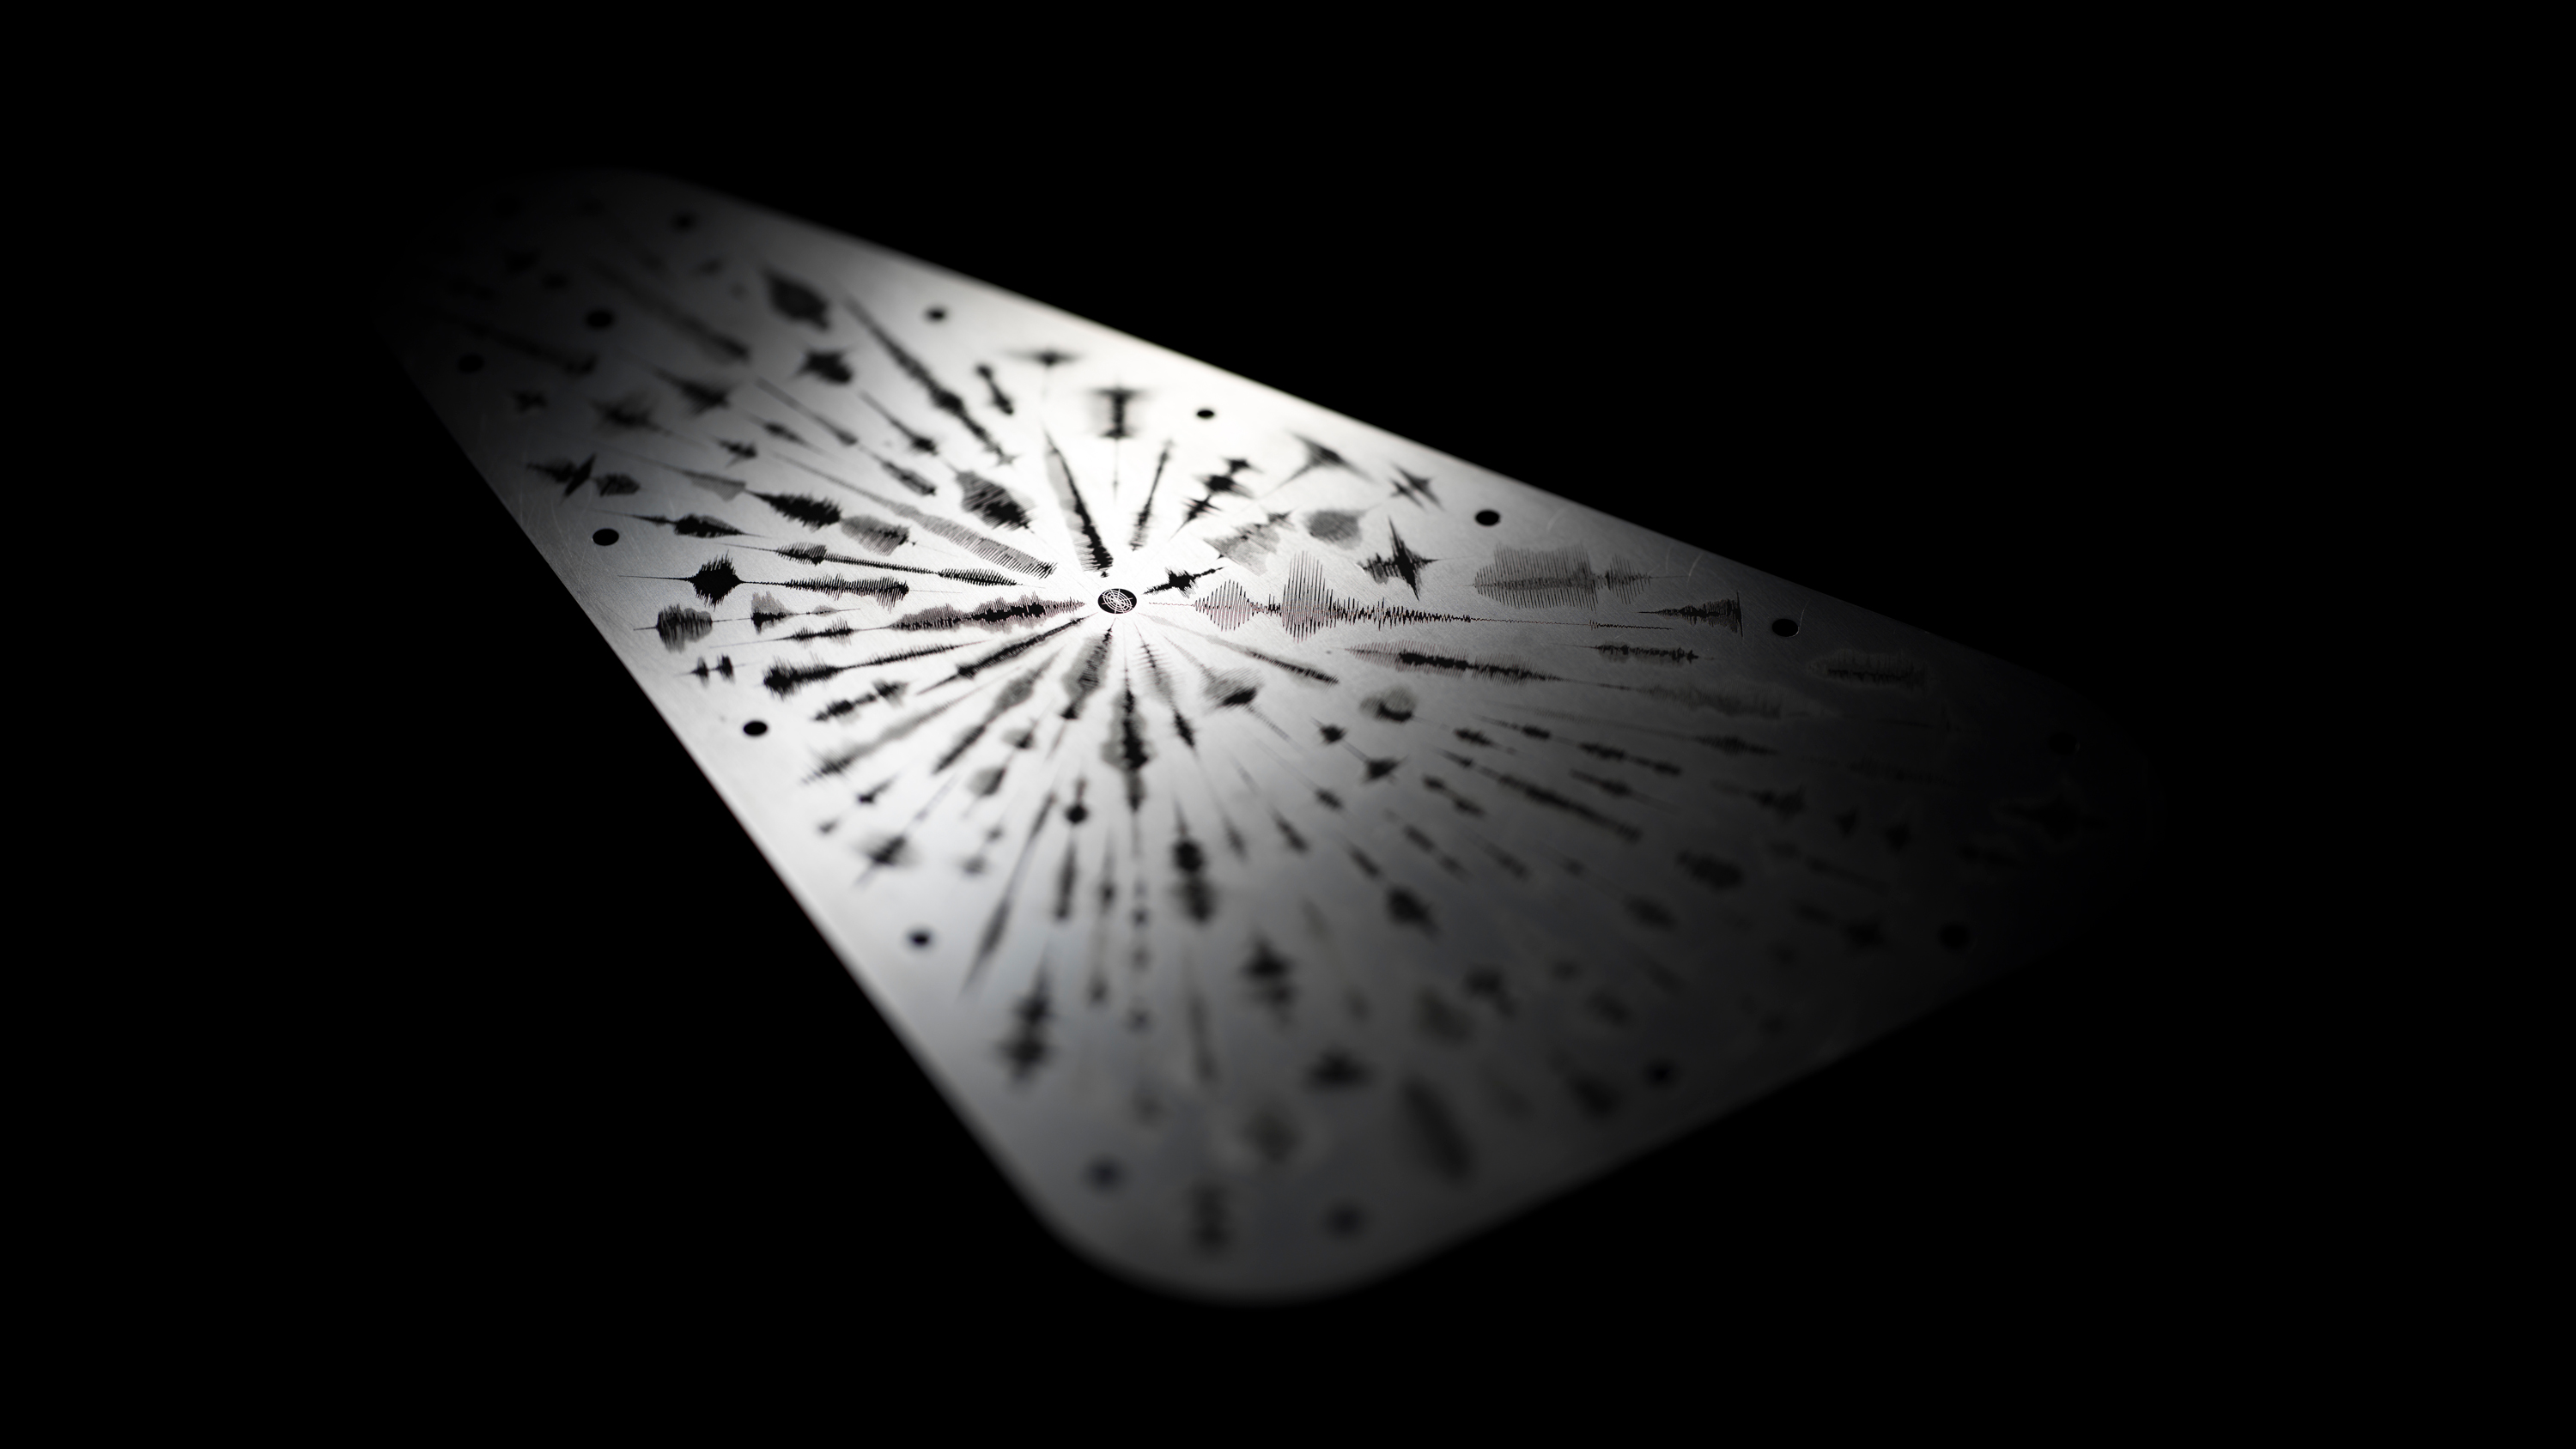 An image of the Europa Clipper vault plate, highlighted from the upper left corner casting shadows that emphasize engraved waveforms emanating from a central point symbolizing the word 'water' in multiple languages. The waveforms present as audio frequency waves. The vault plate is metal silver and the engravings are black, set against a black background.